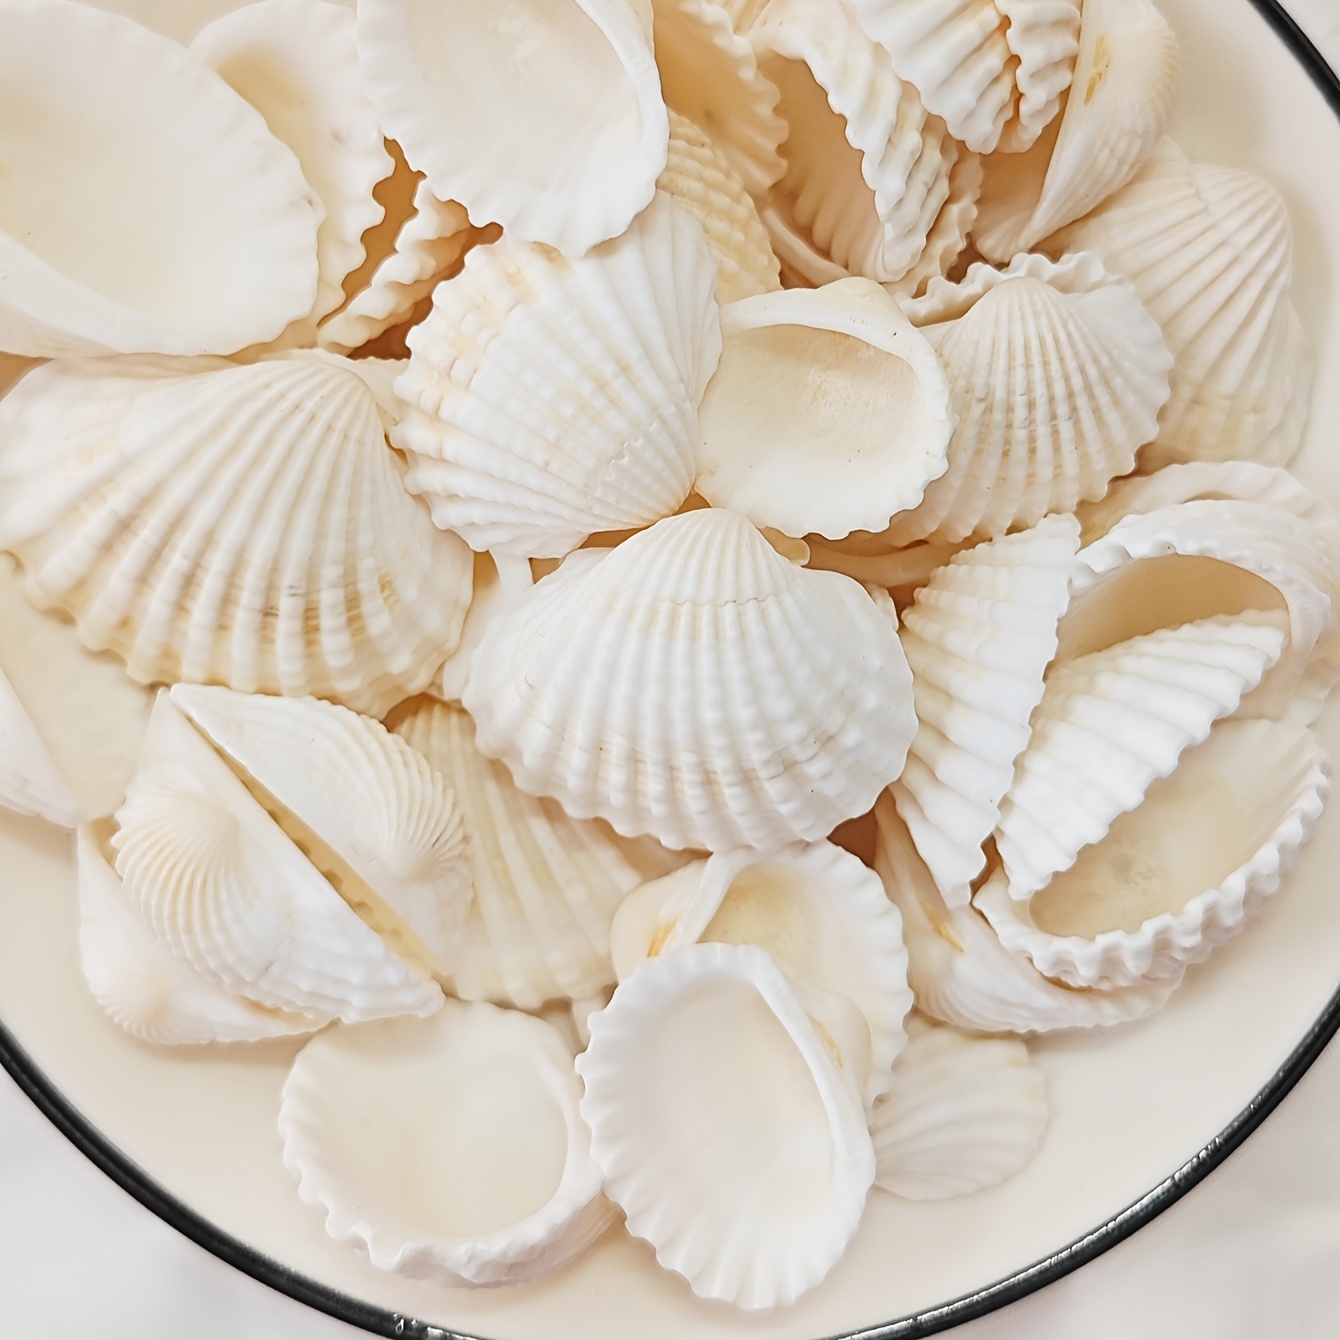 

100g Natural Conch Shells For Diy Crafts - Ocean-inspired Decorations For Aquariums, Wind Chimes & Photo Frames